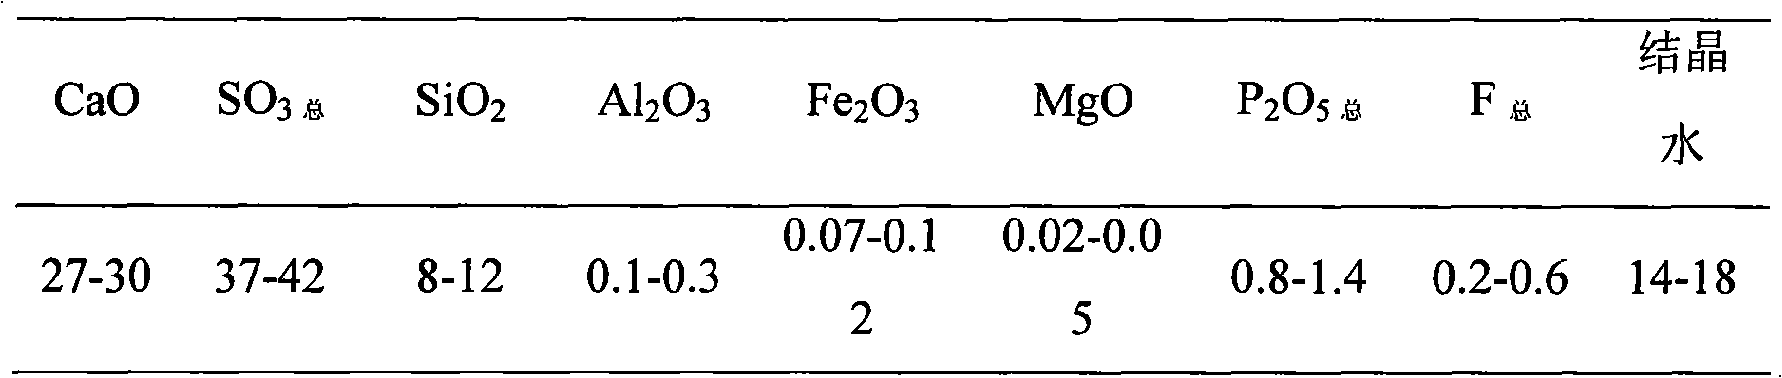 Process for producing calcium carbonate by absorbing carbon dioxide with ardealite decompose slag